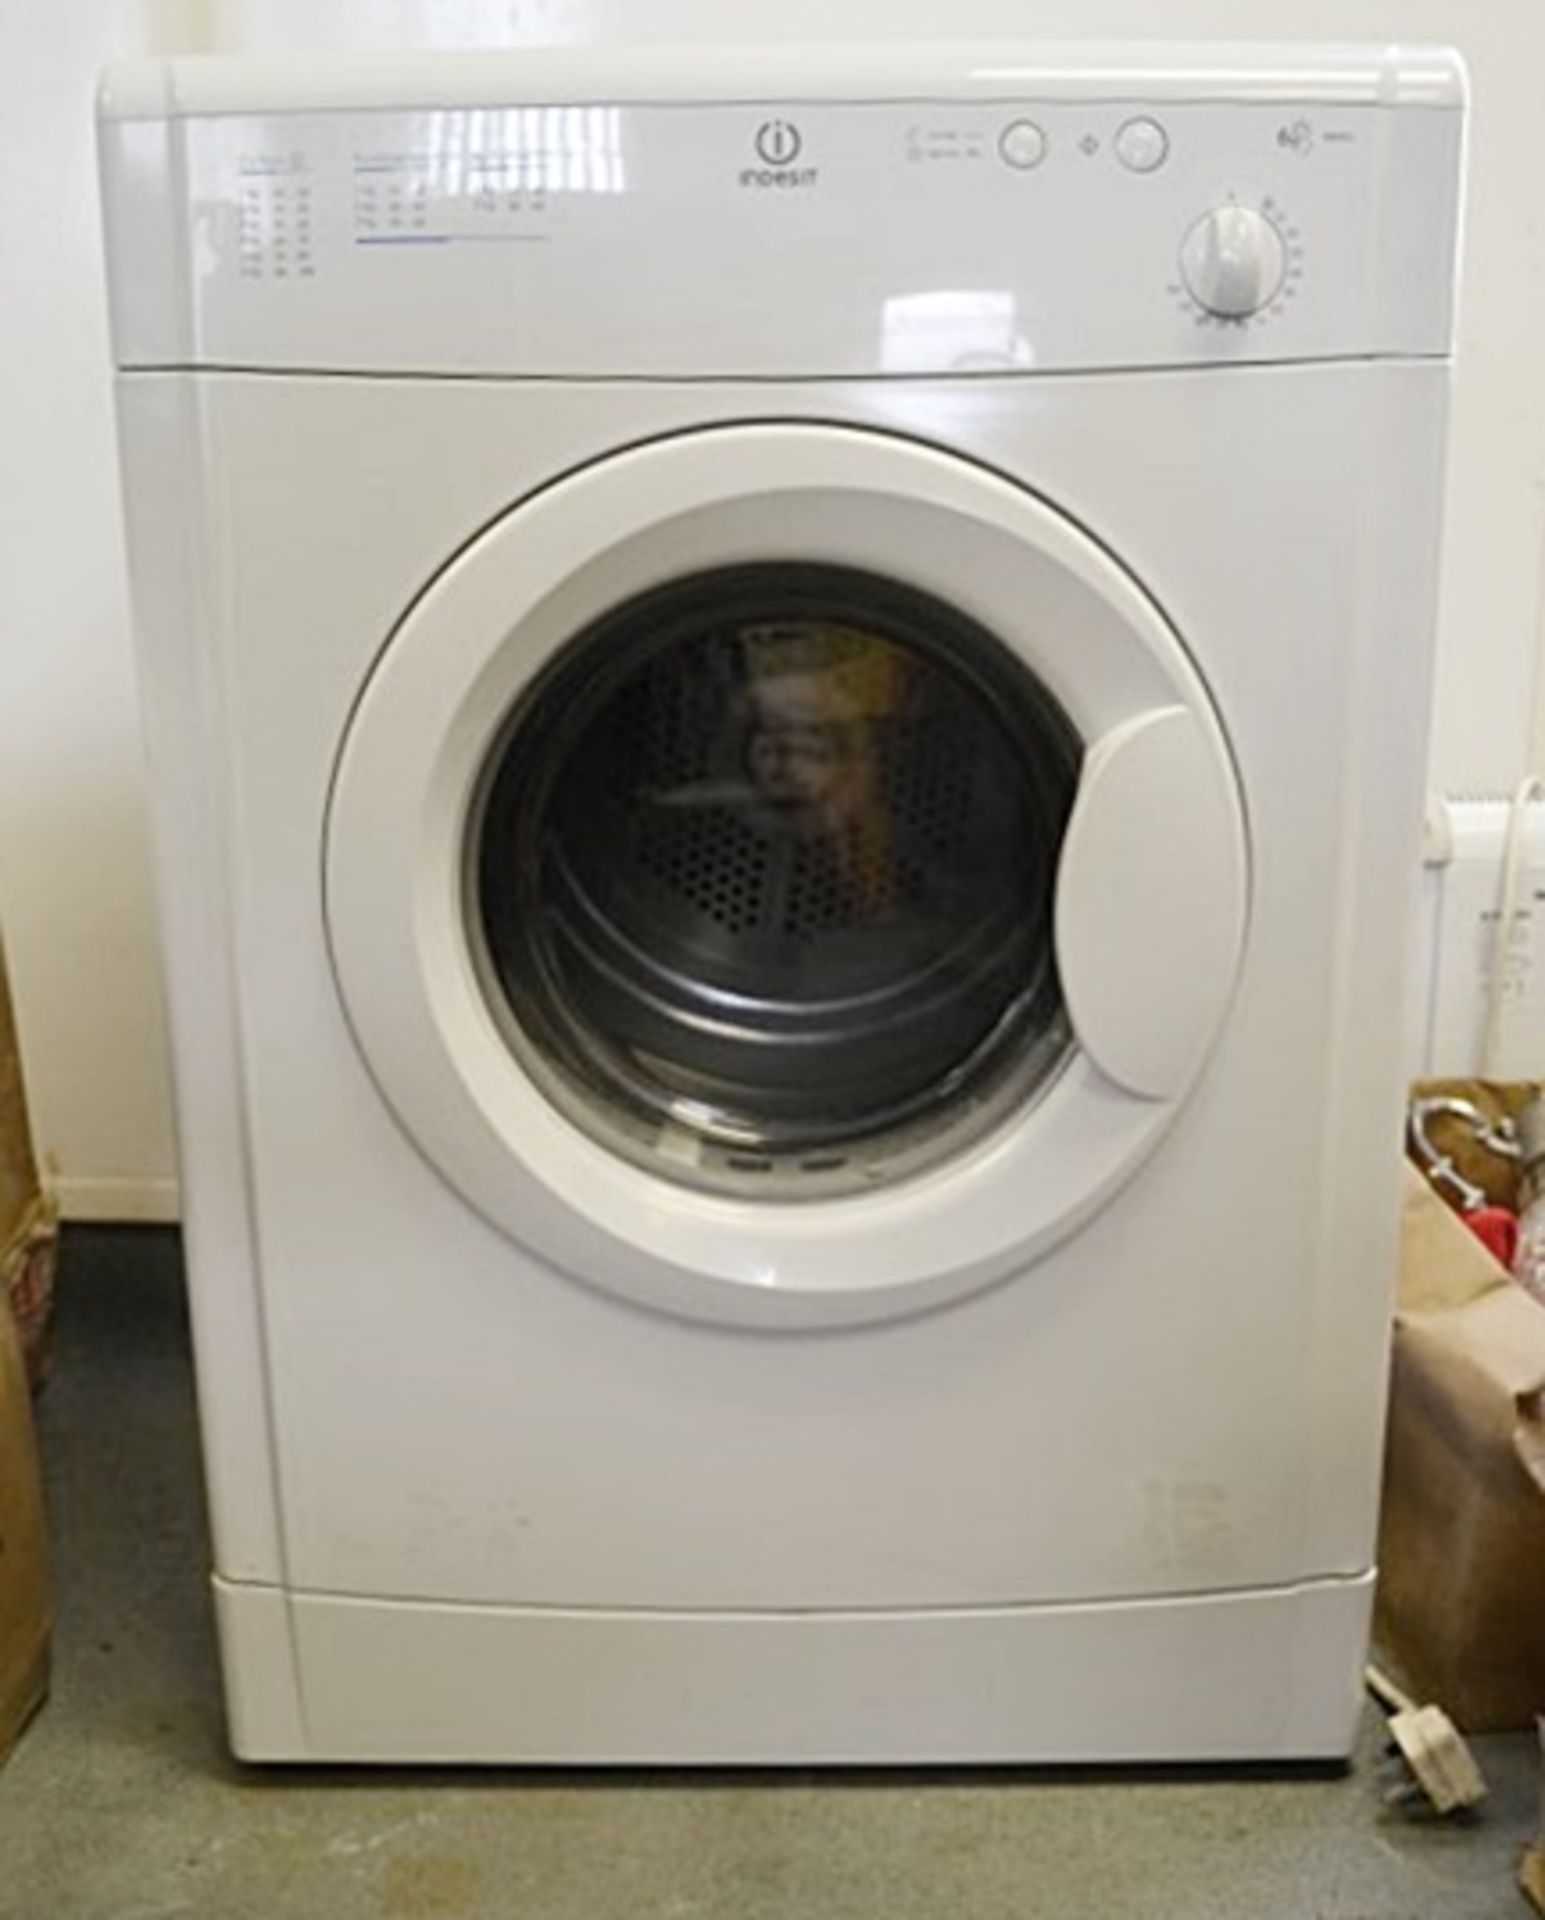 1 x Indesit Tumble Dryer (ModeL: IS60 VU) - From A Clean Manor House Environment In Good Working